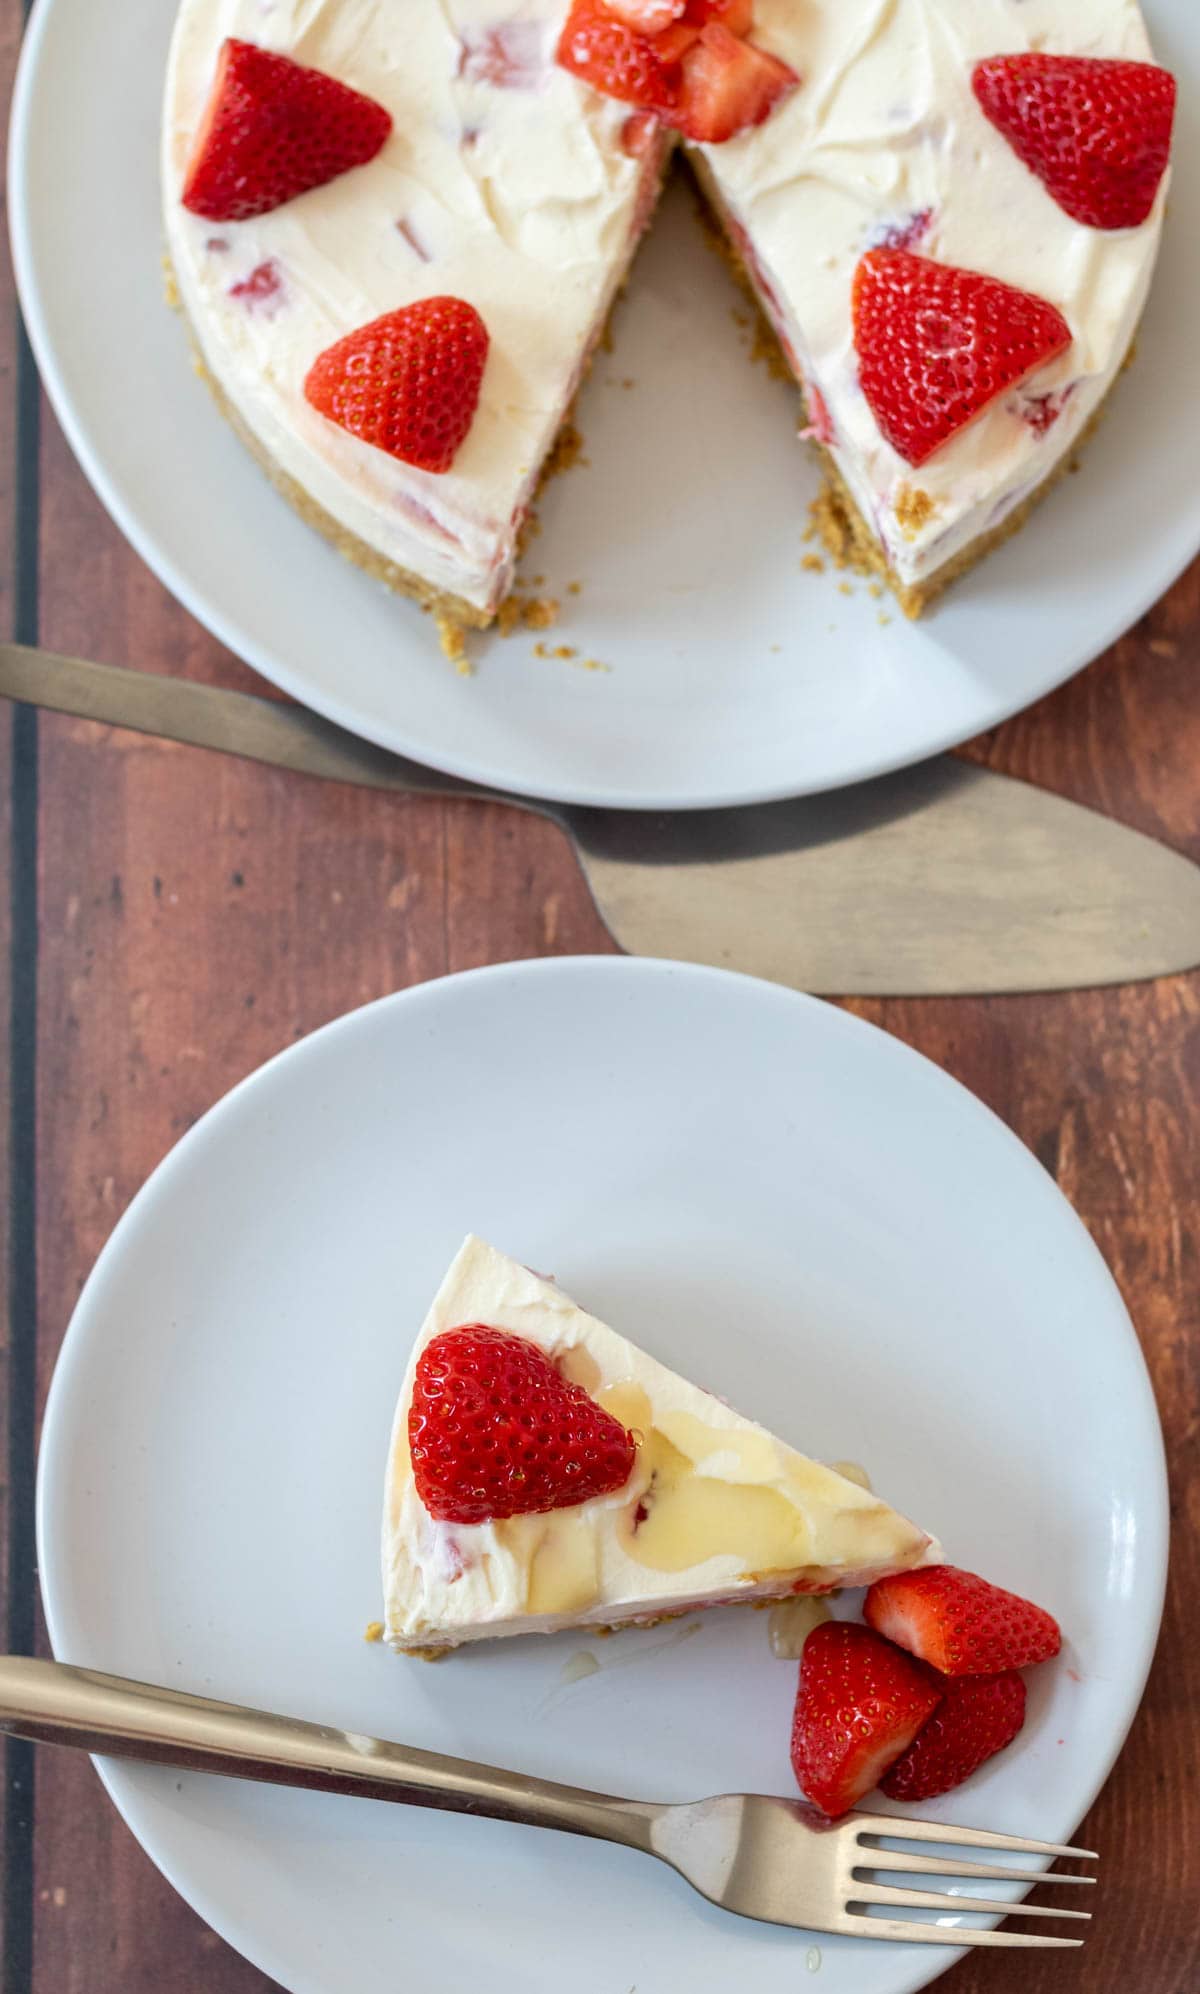 Overhead view of a slice of easy no-bake strawberry cheesecake on a plate. Rest of the cheesecut uncut on a plate above with a cake slice in between.